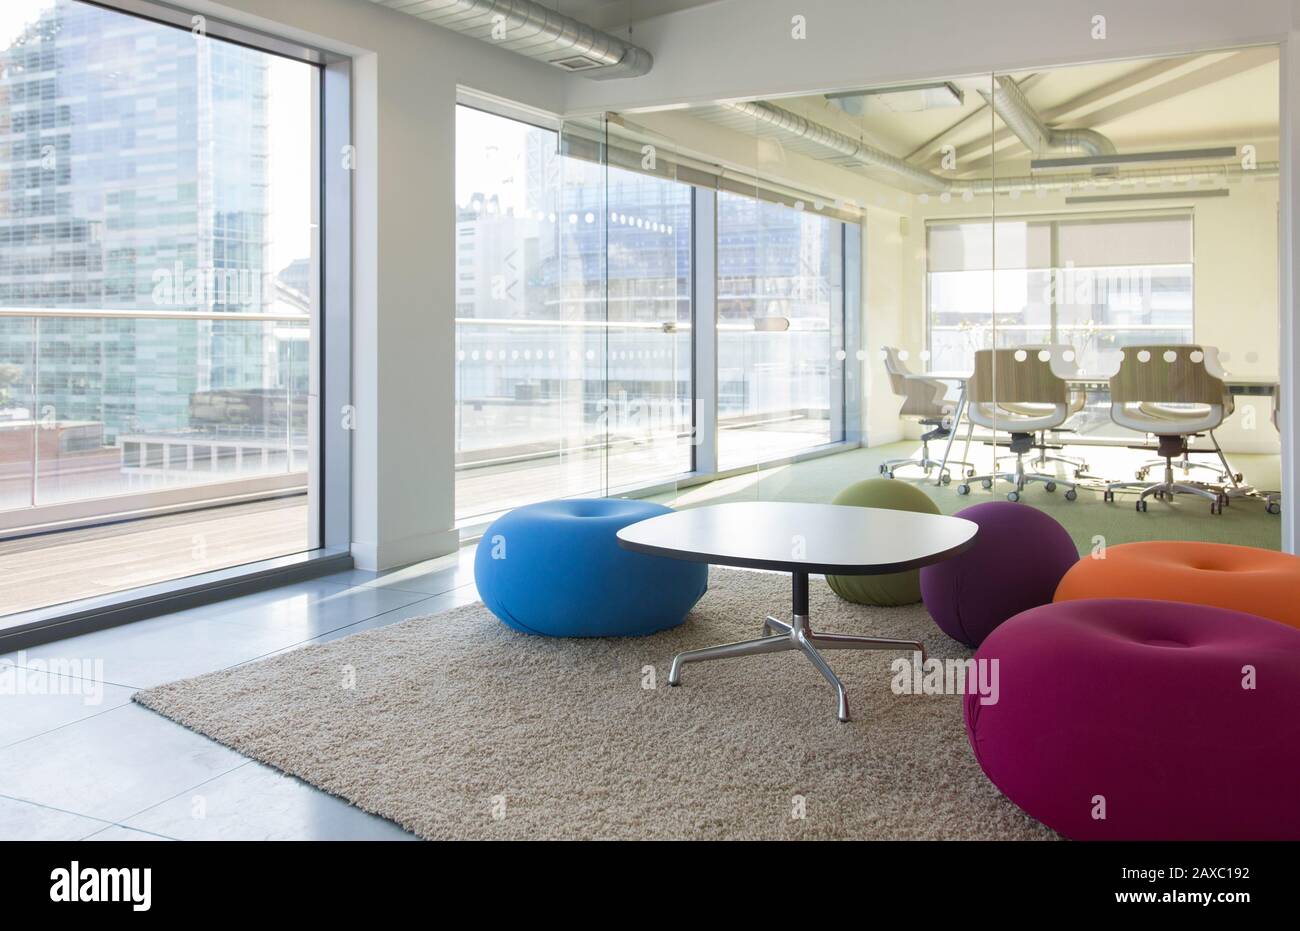 Creative open plan office space with bean bag chairs Stock Photo